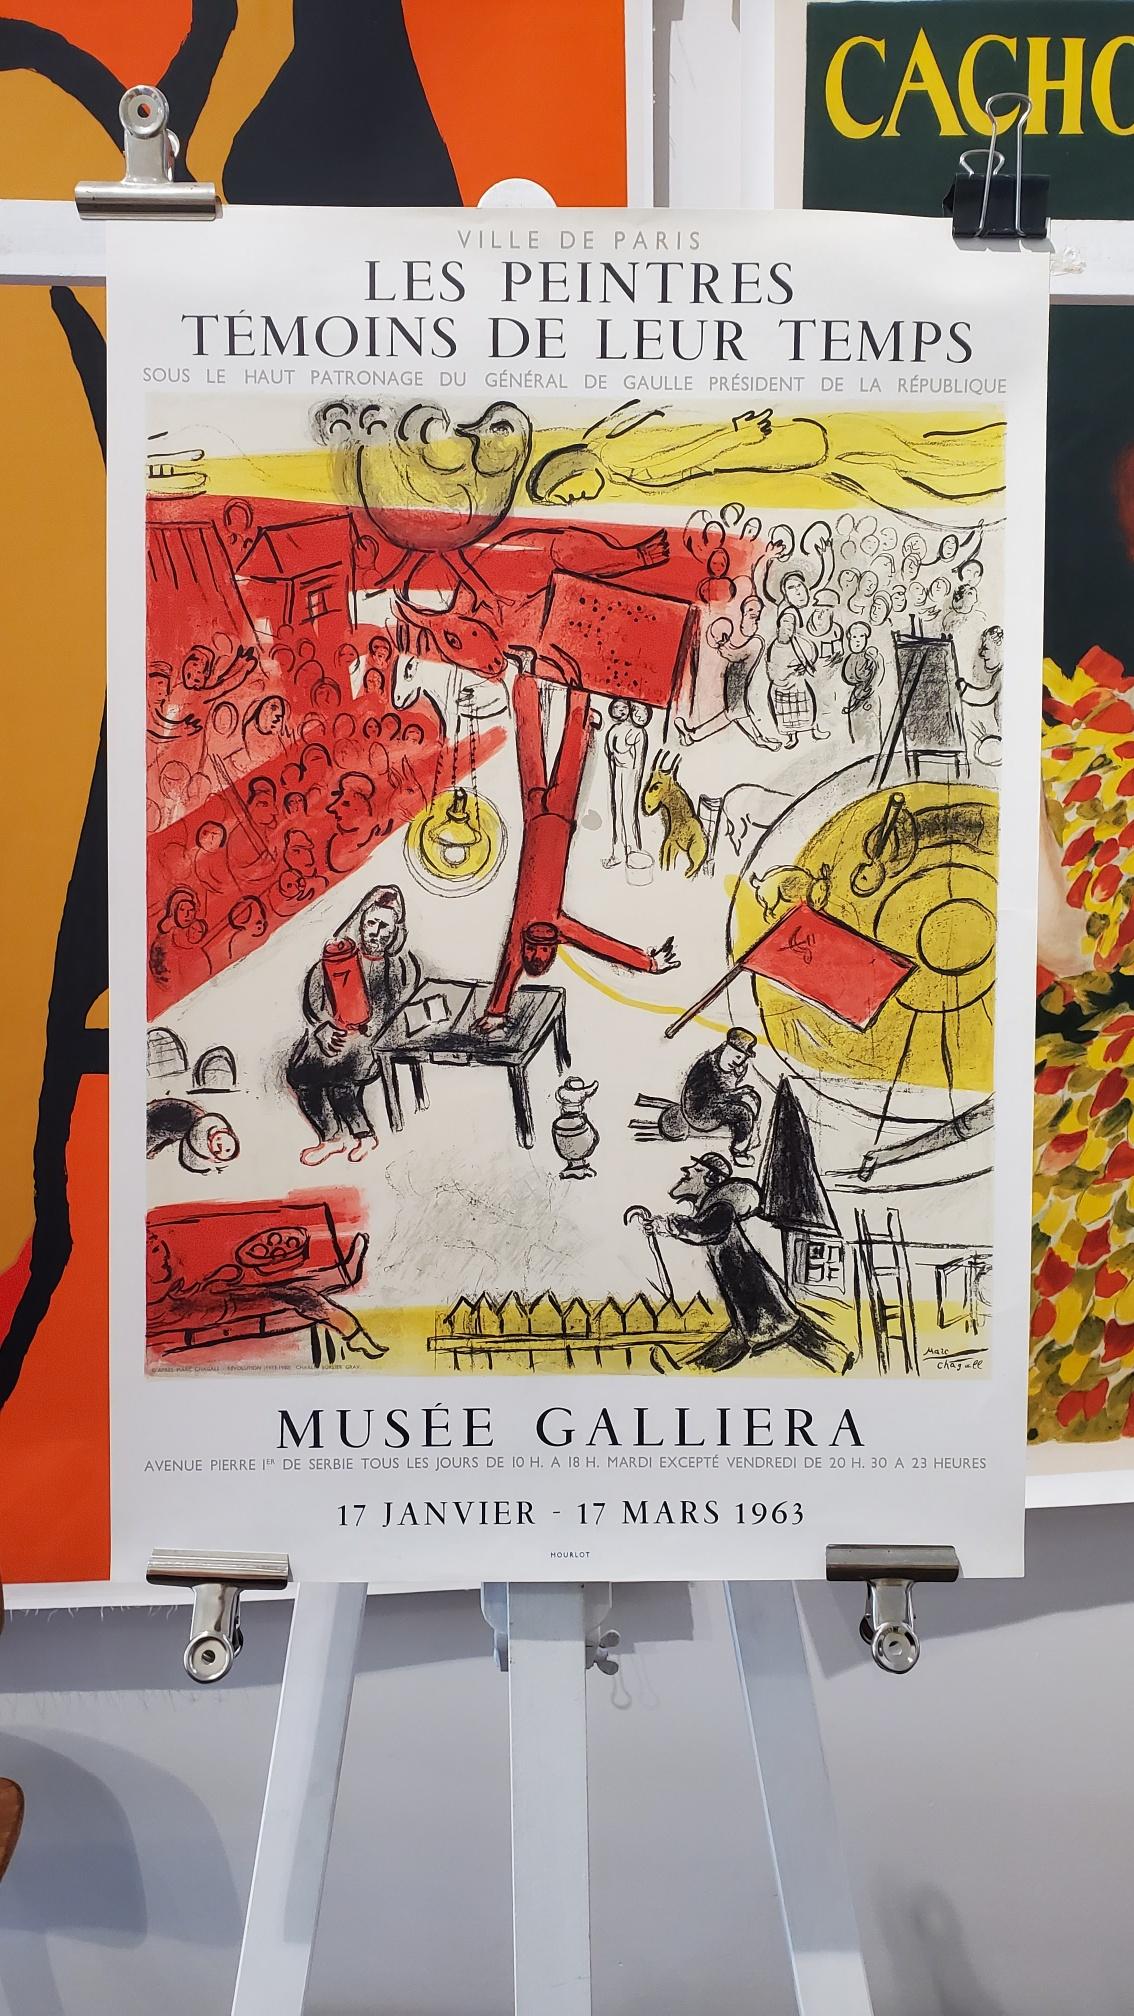 1963, 'La Revolution' MARC CHAGALL original exhibition poster.

This poster is in good condition, the poster is consistent with age, the colours are vibrant. 

ARTIST 
Marc Chagall

CONDITION 
Excellent

DIMENSIONS 
78 x 56 cm

YEAR